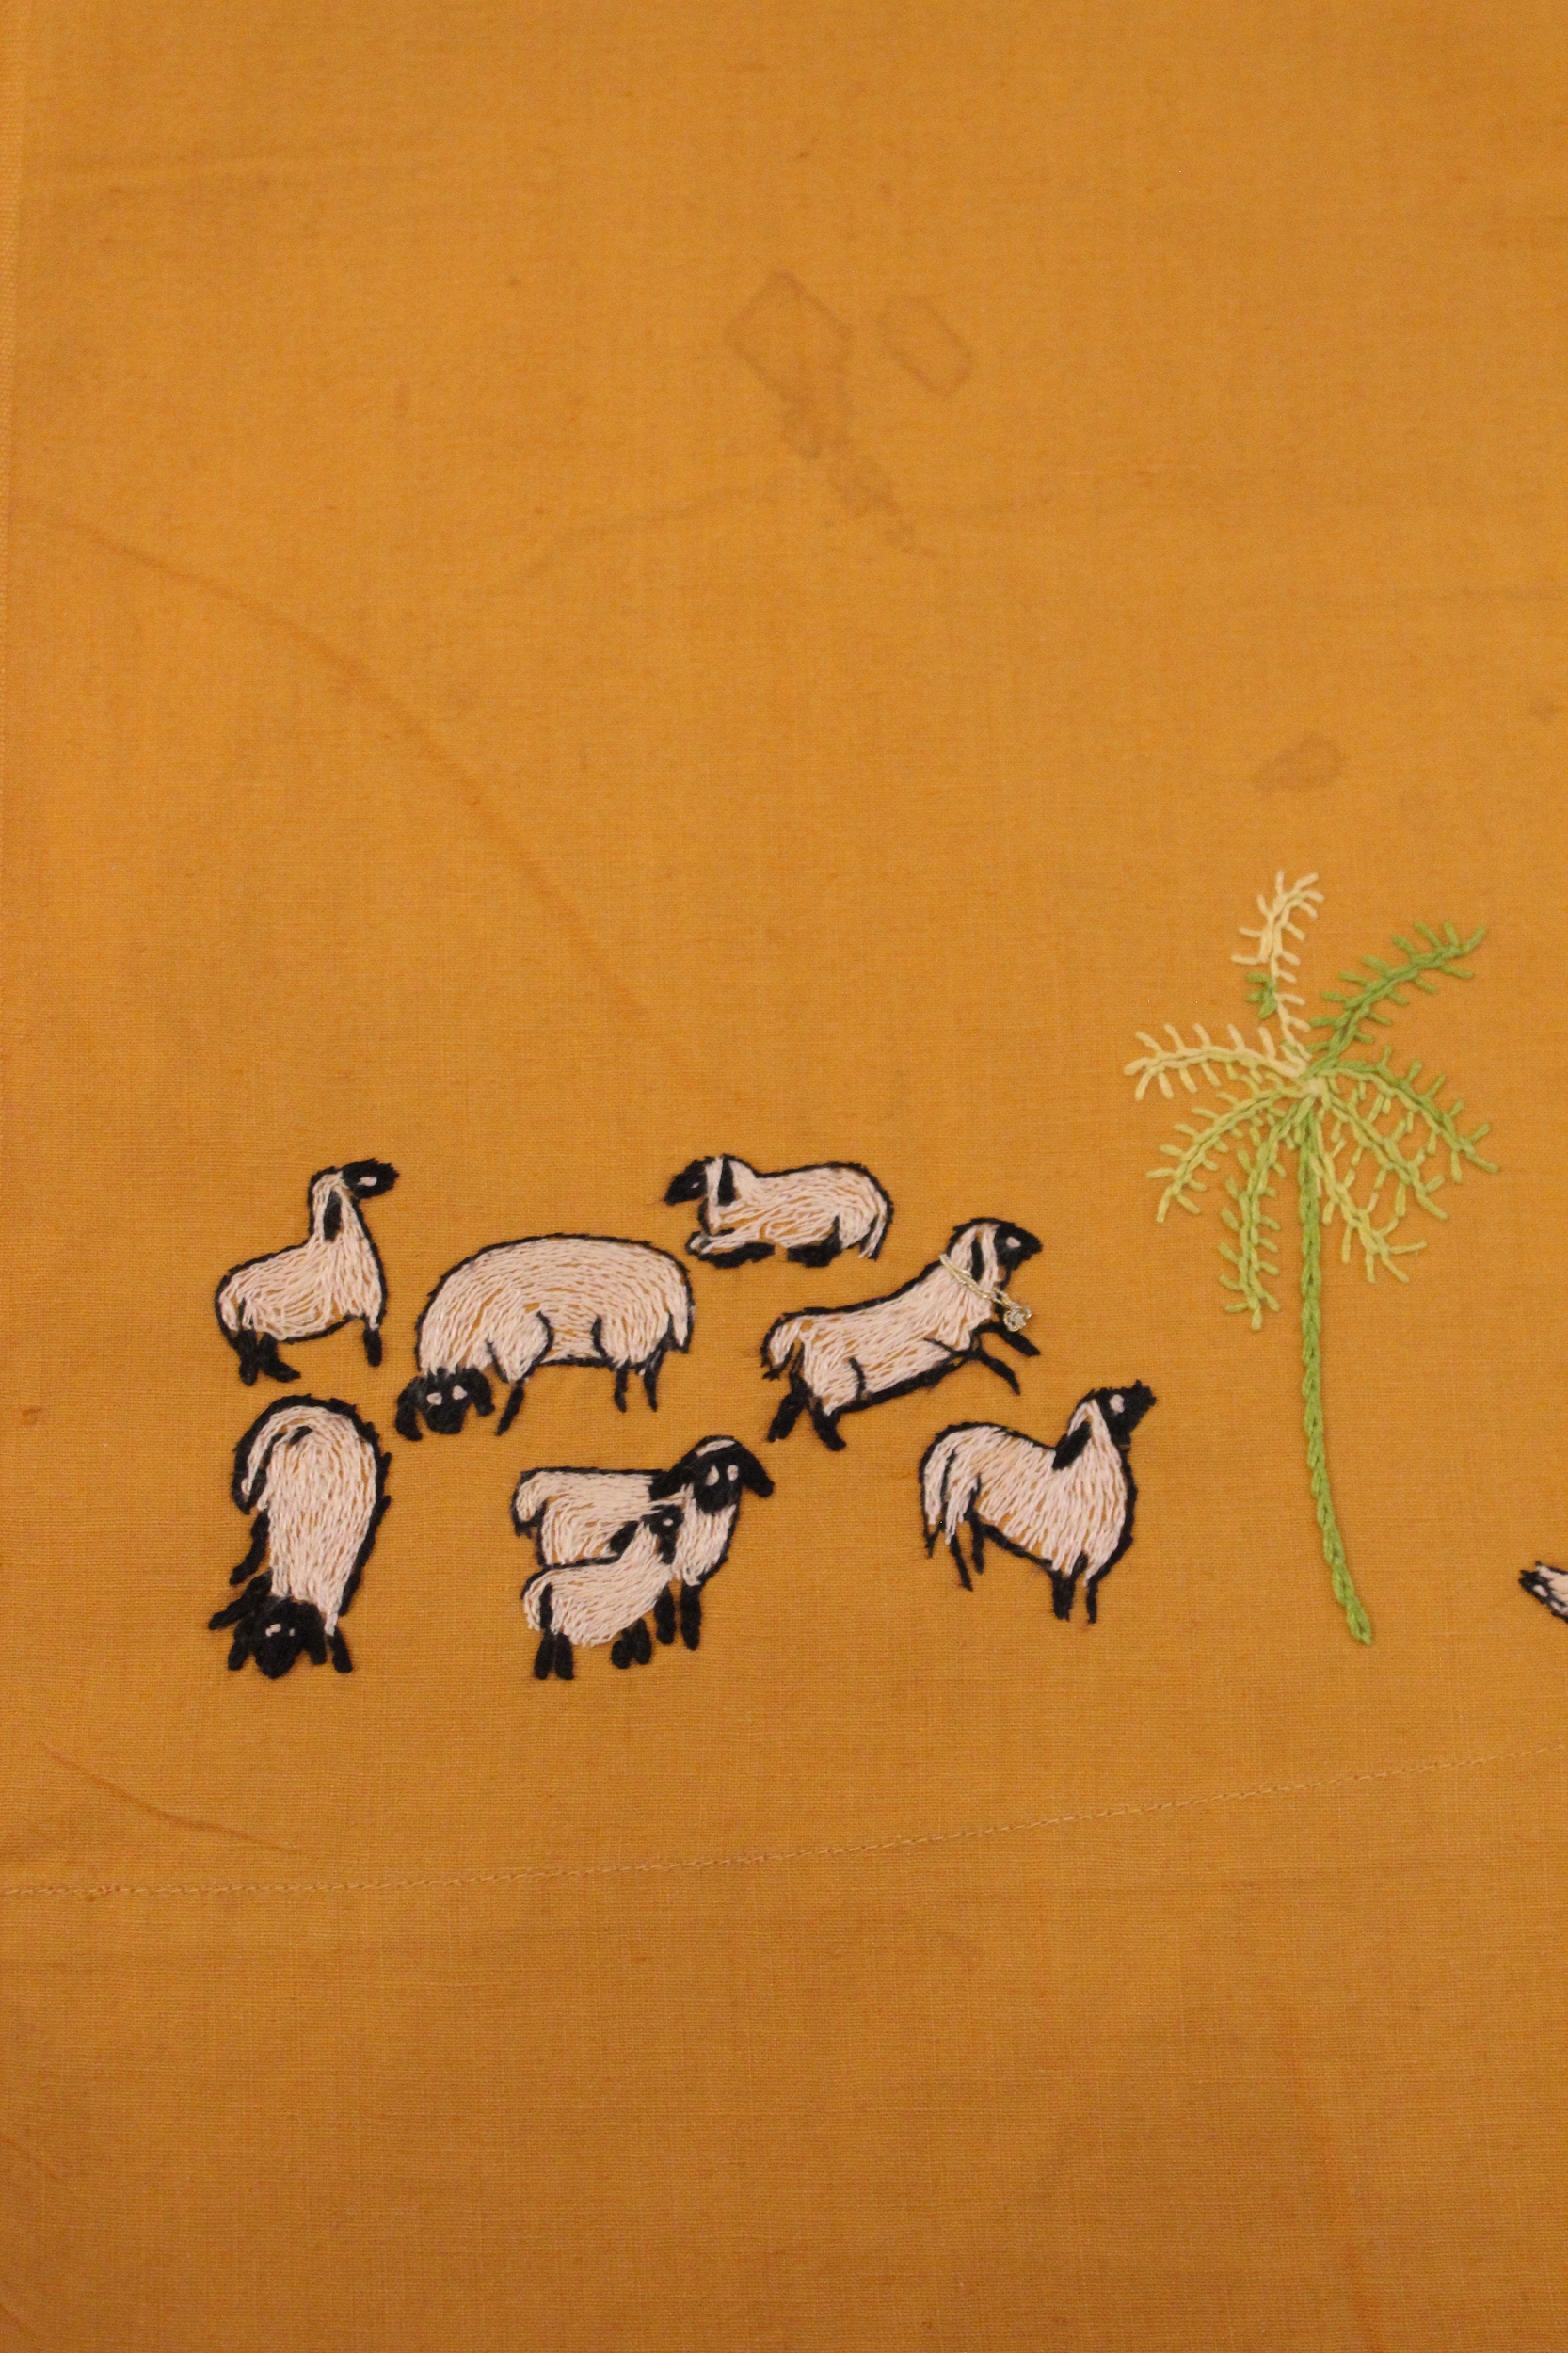 Embroidered depiction of eight sheep with white bodies and black faces, ears, and feet. A small palm tree is to the right.